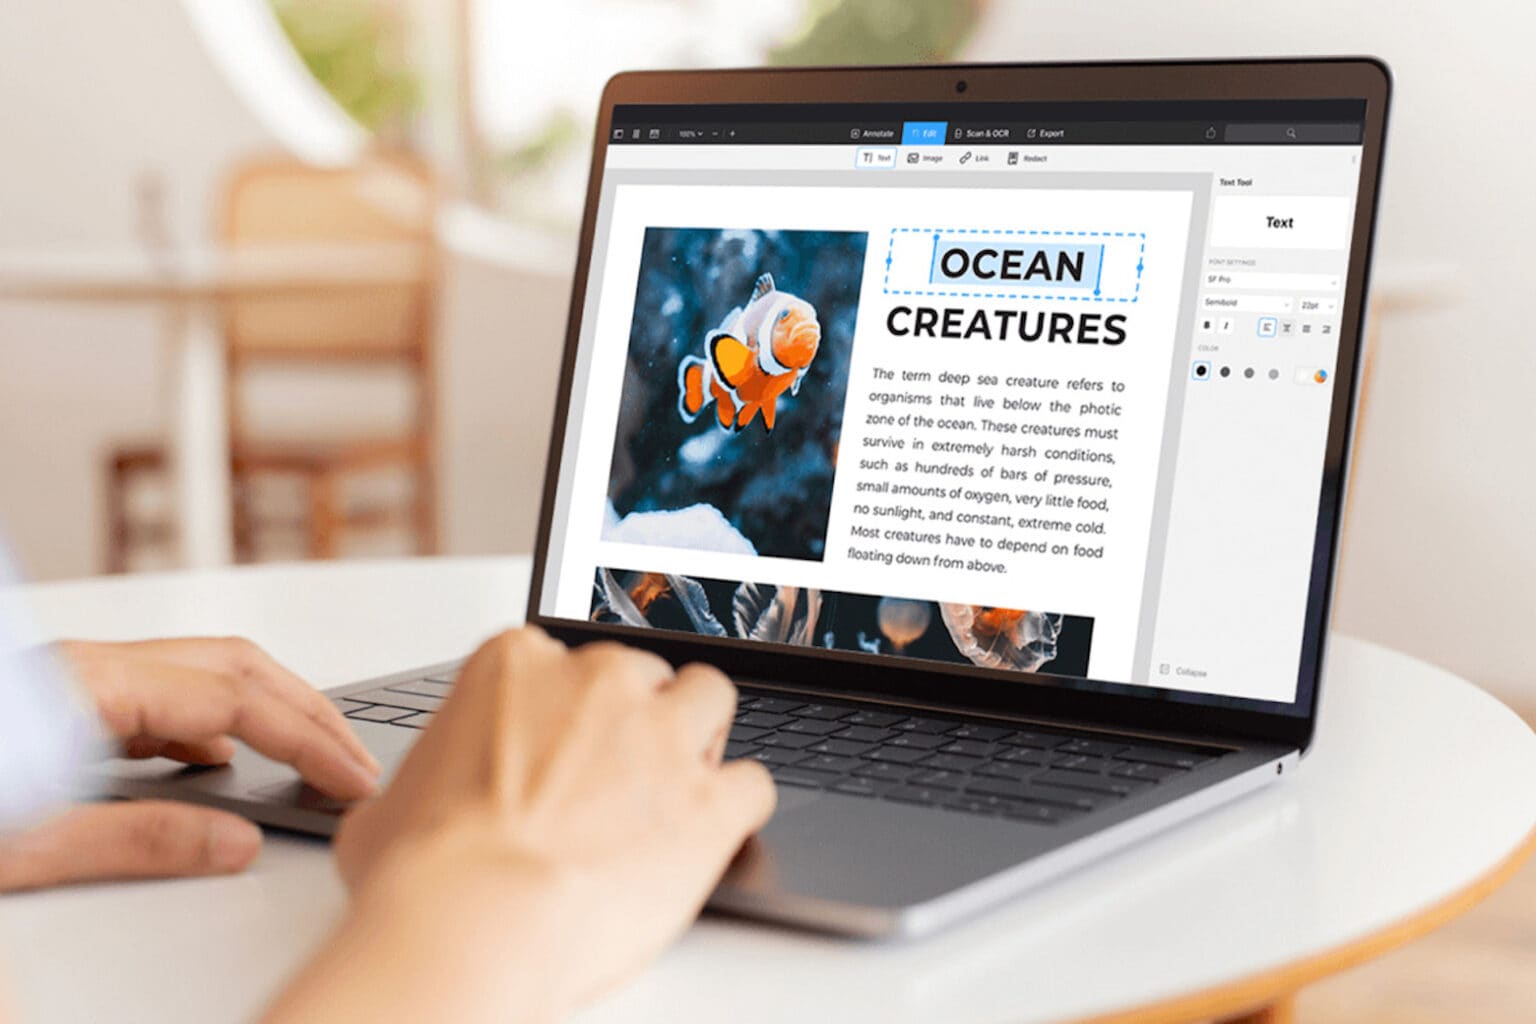 Never have trouble editing a document again with this award-winning PDF editor, now $70.